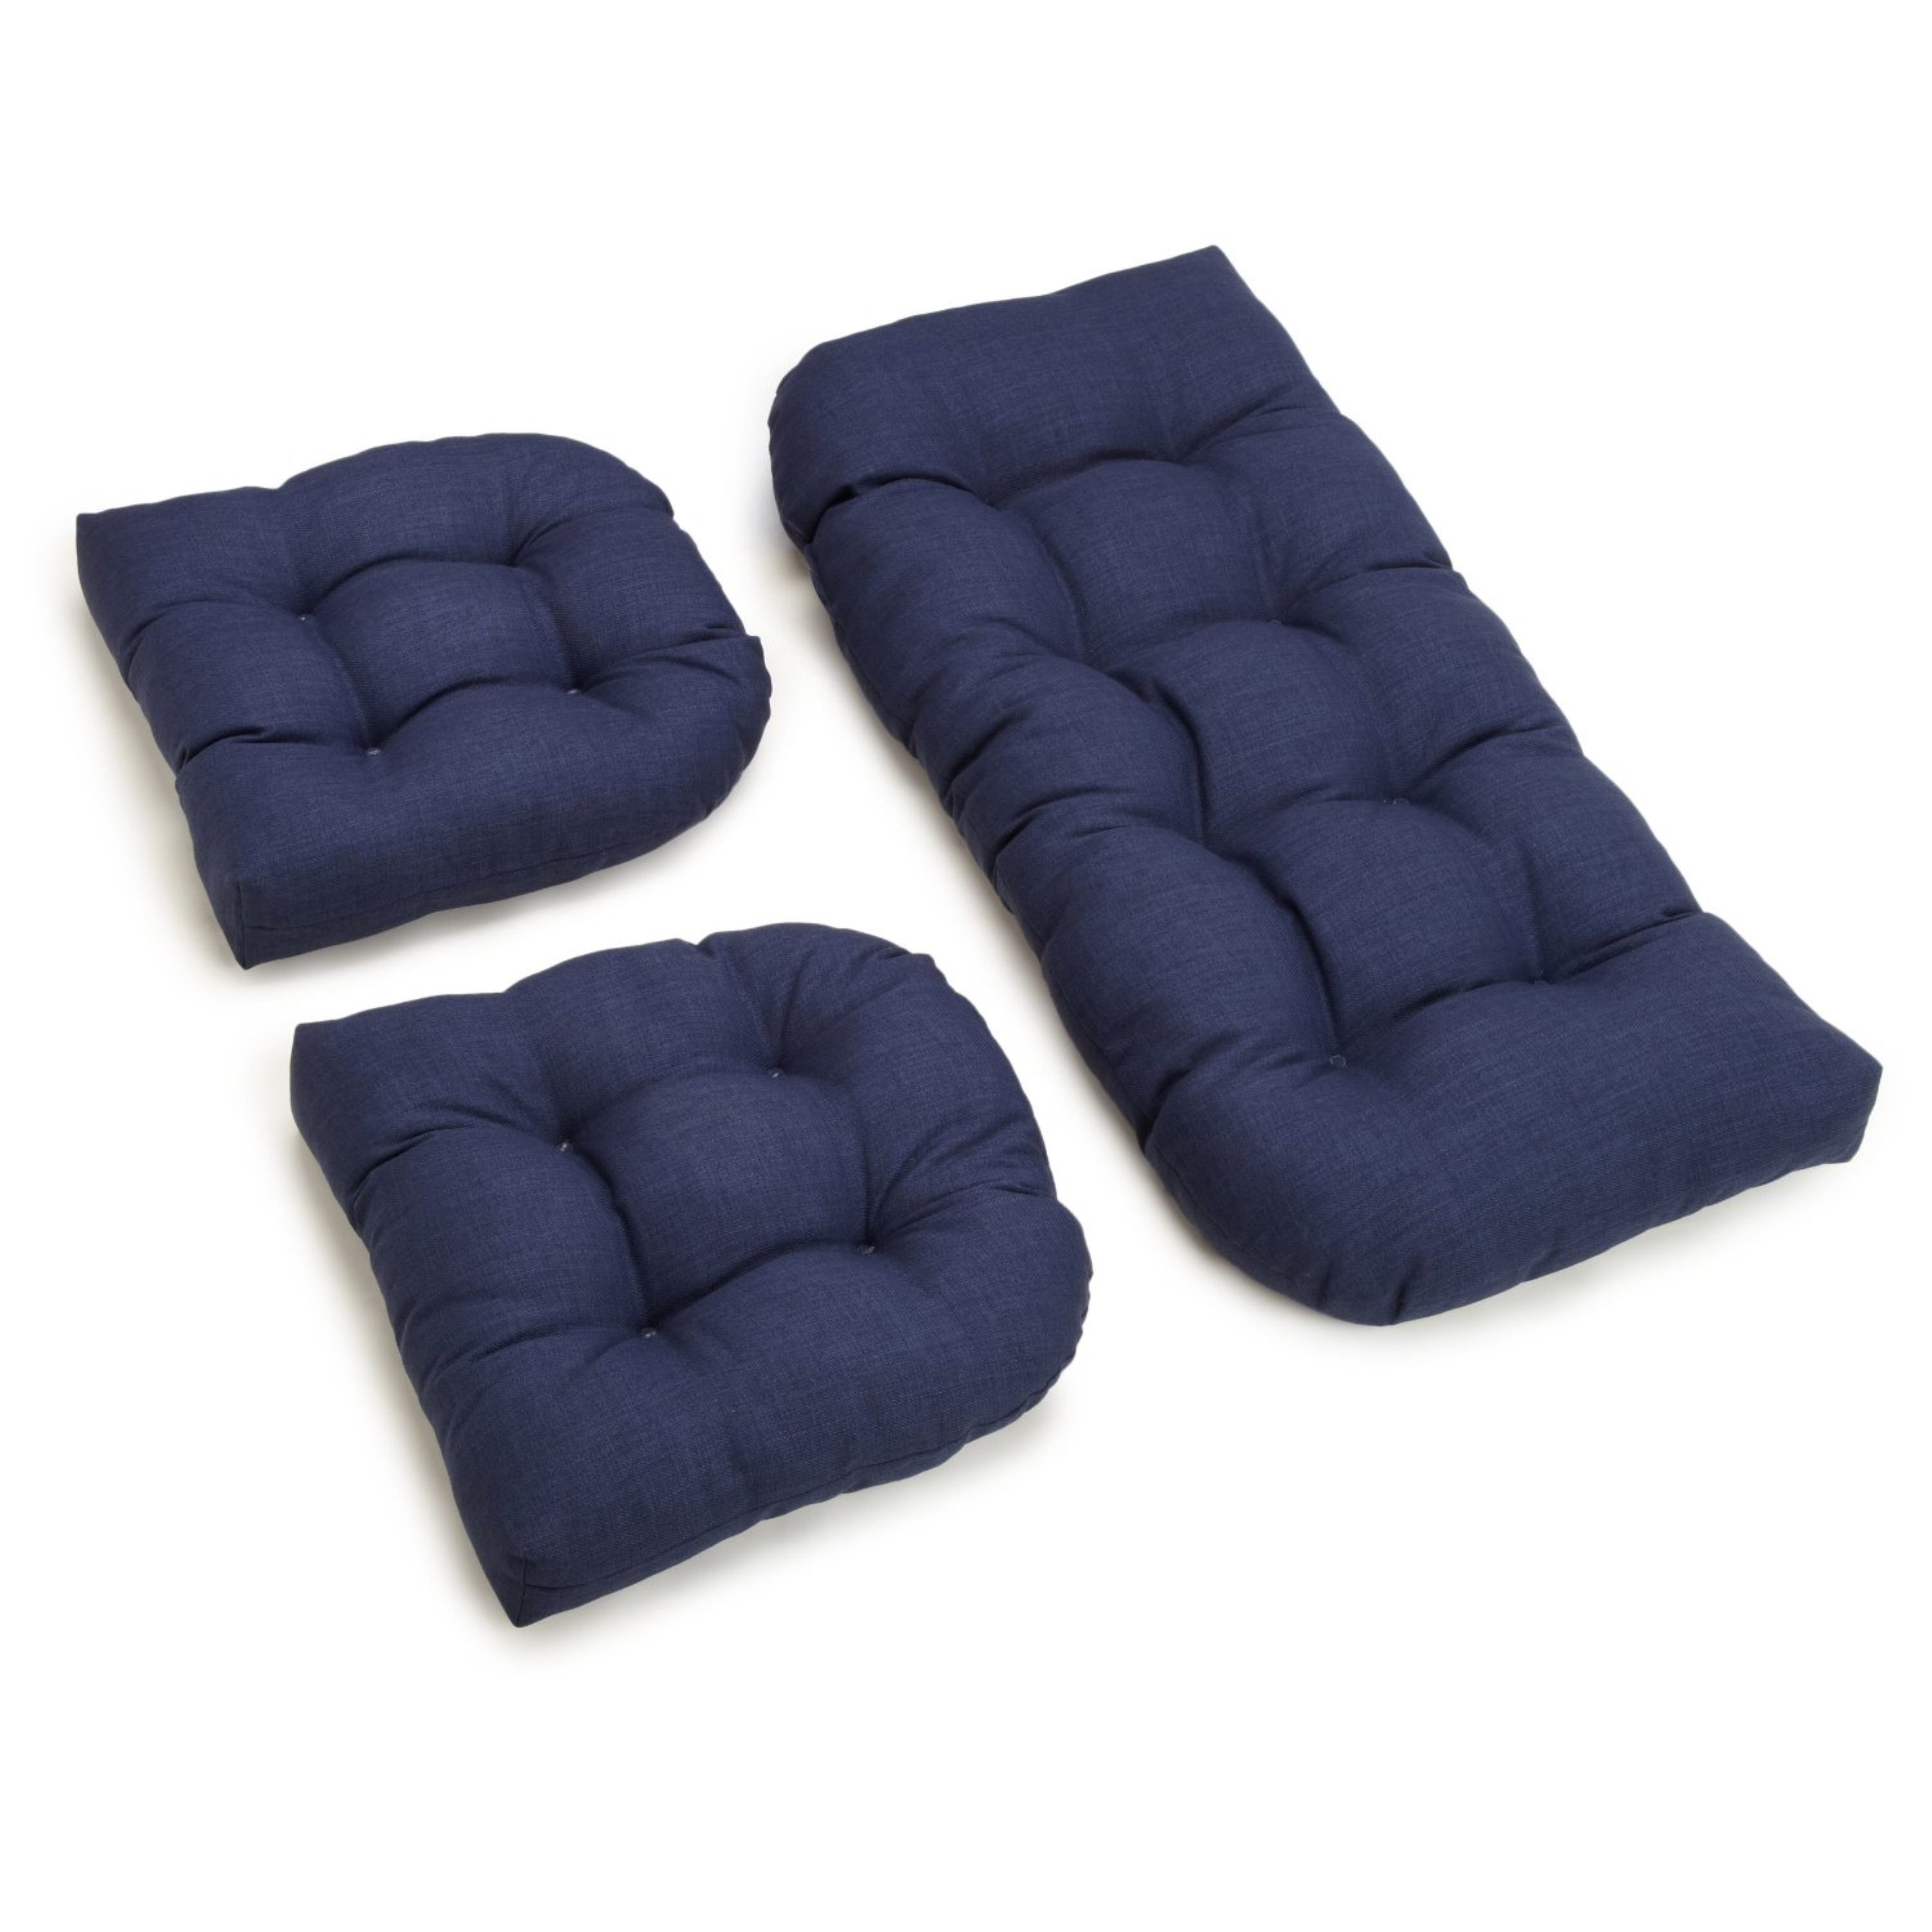 Cheer Collection Memory Foam Leg and Foot Rest Cushion - On Sale - Bed Bath  & Beyond - 19210811